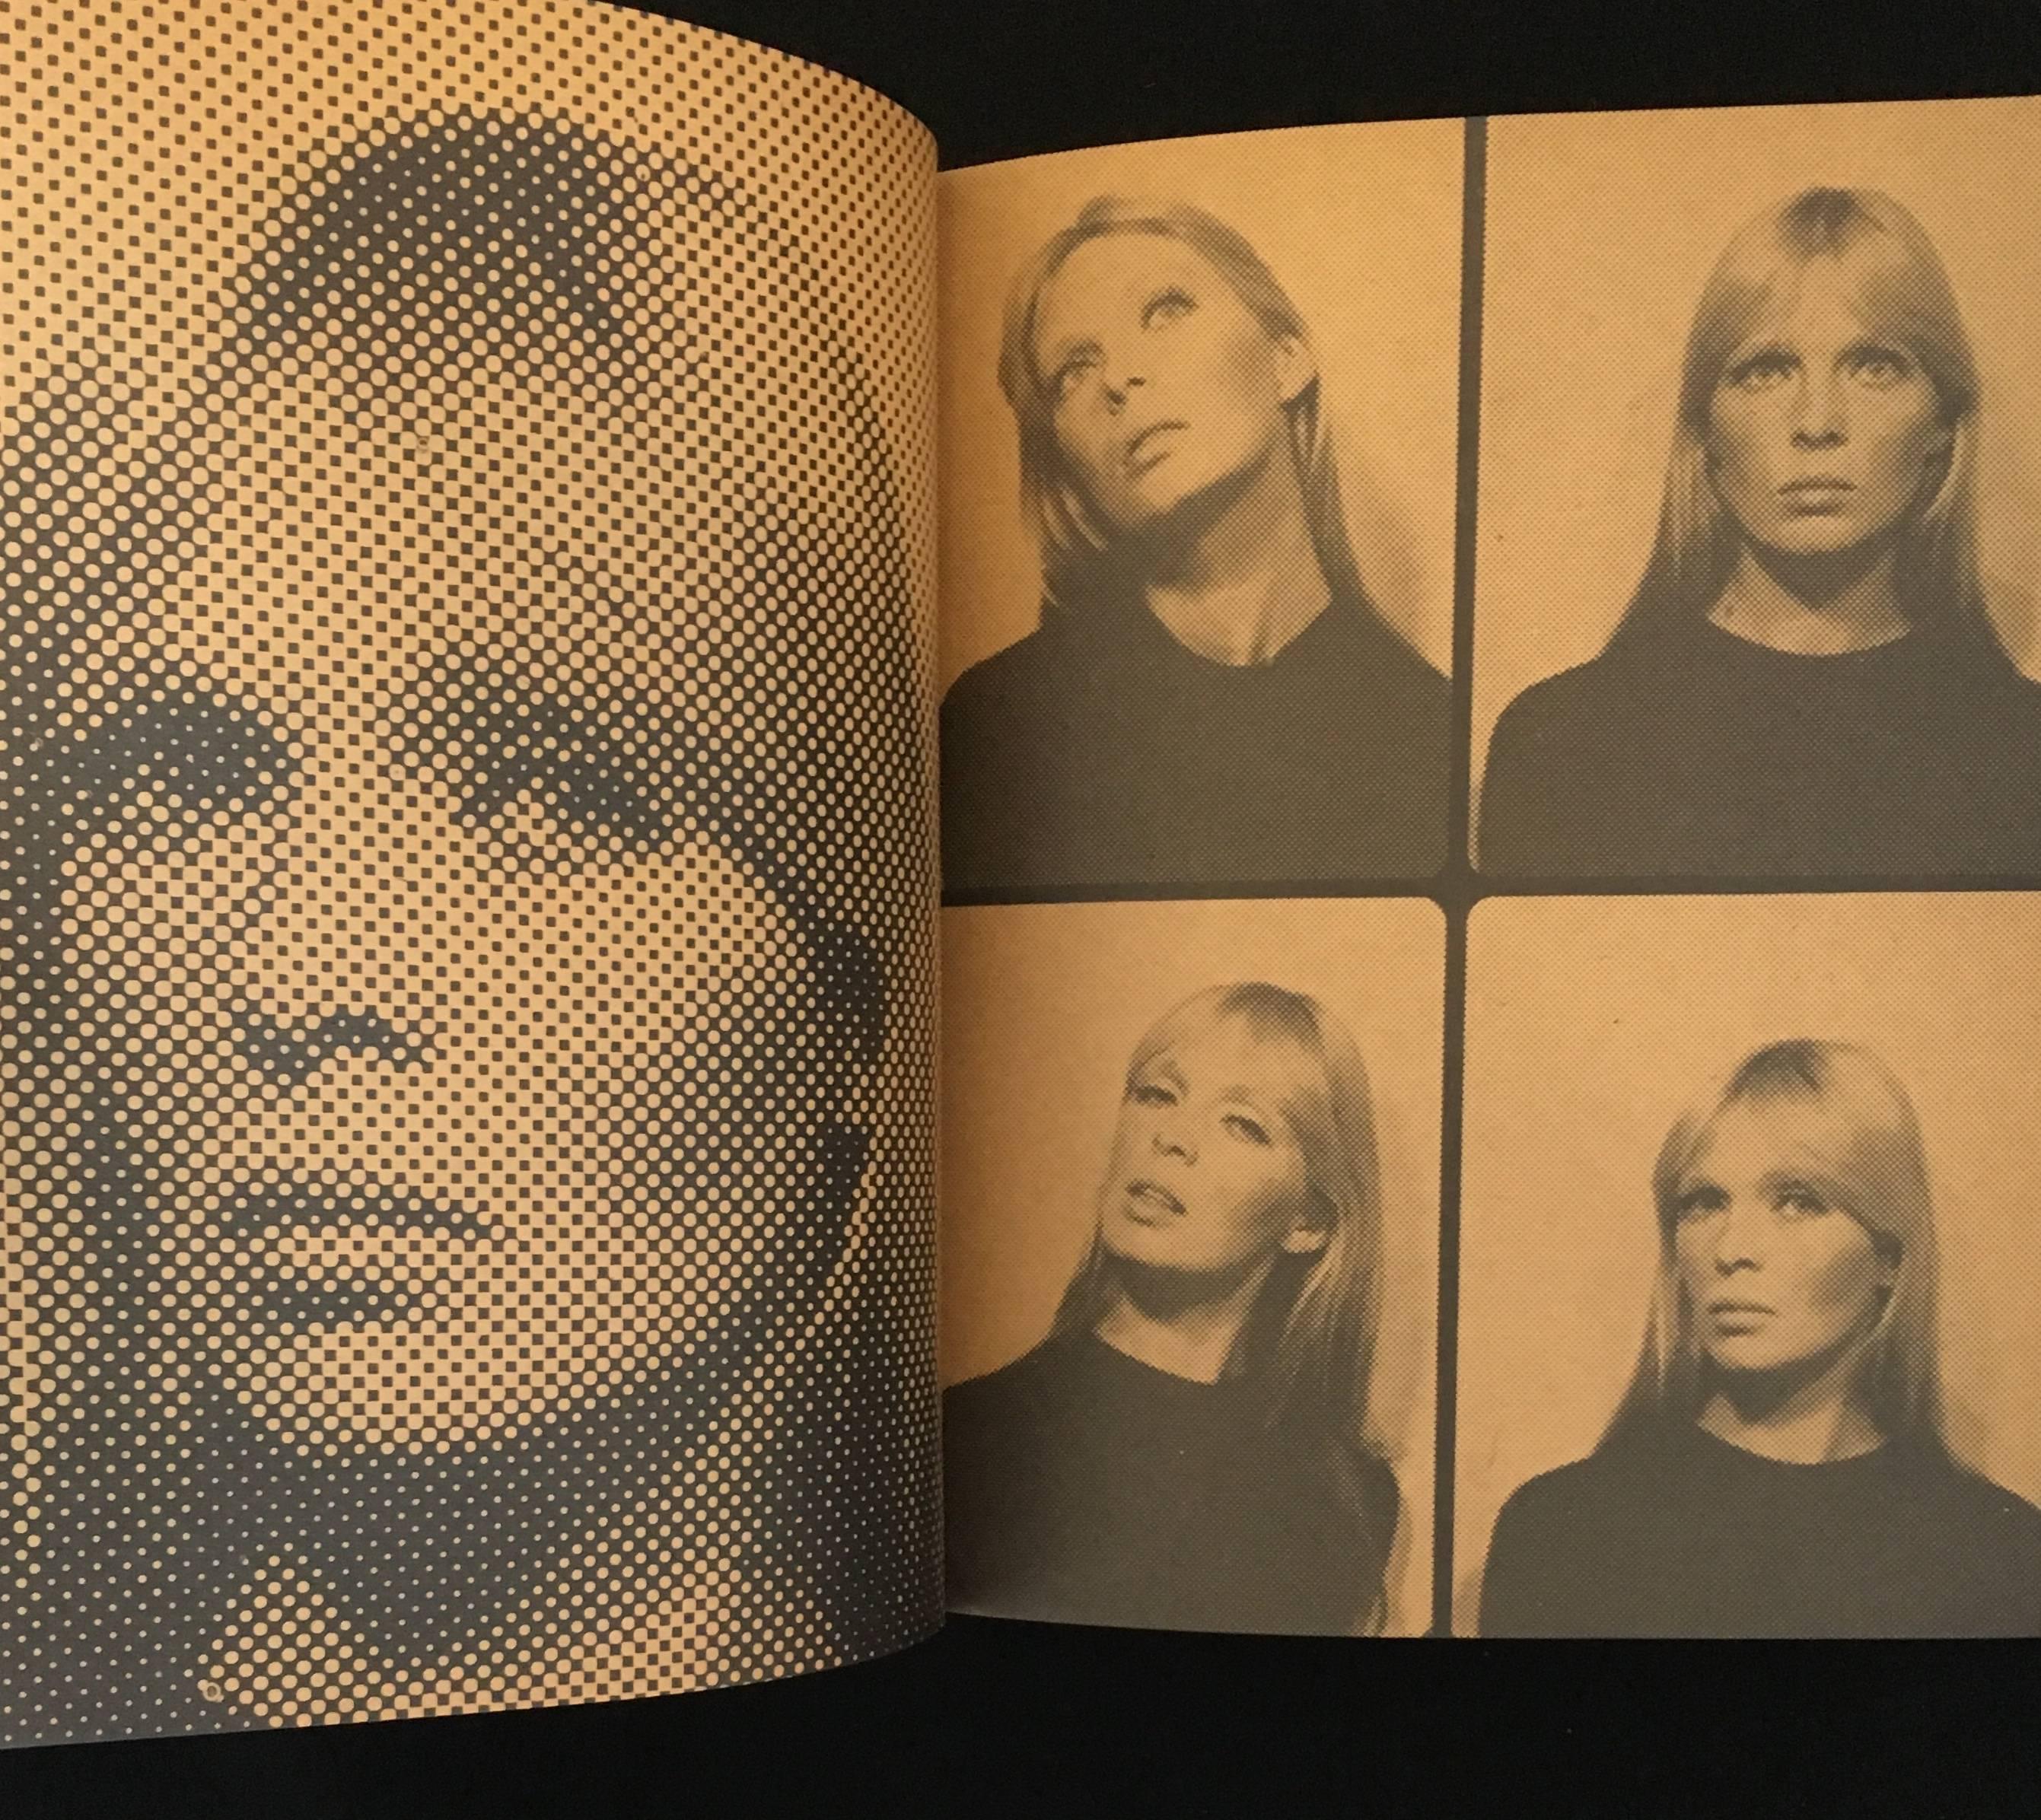 Andy Warhol, Film Culture 1967
Film Culture magazine, 1967. First edition. Featuring imagery and design by Andy Warhol. Issue devoted to Warhol films.  Warhol designed the cover using portraits taken in a photo booth for the cover and inside pages.